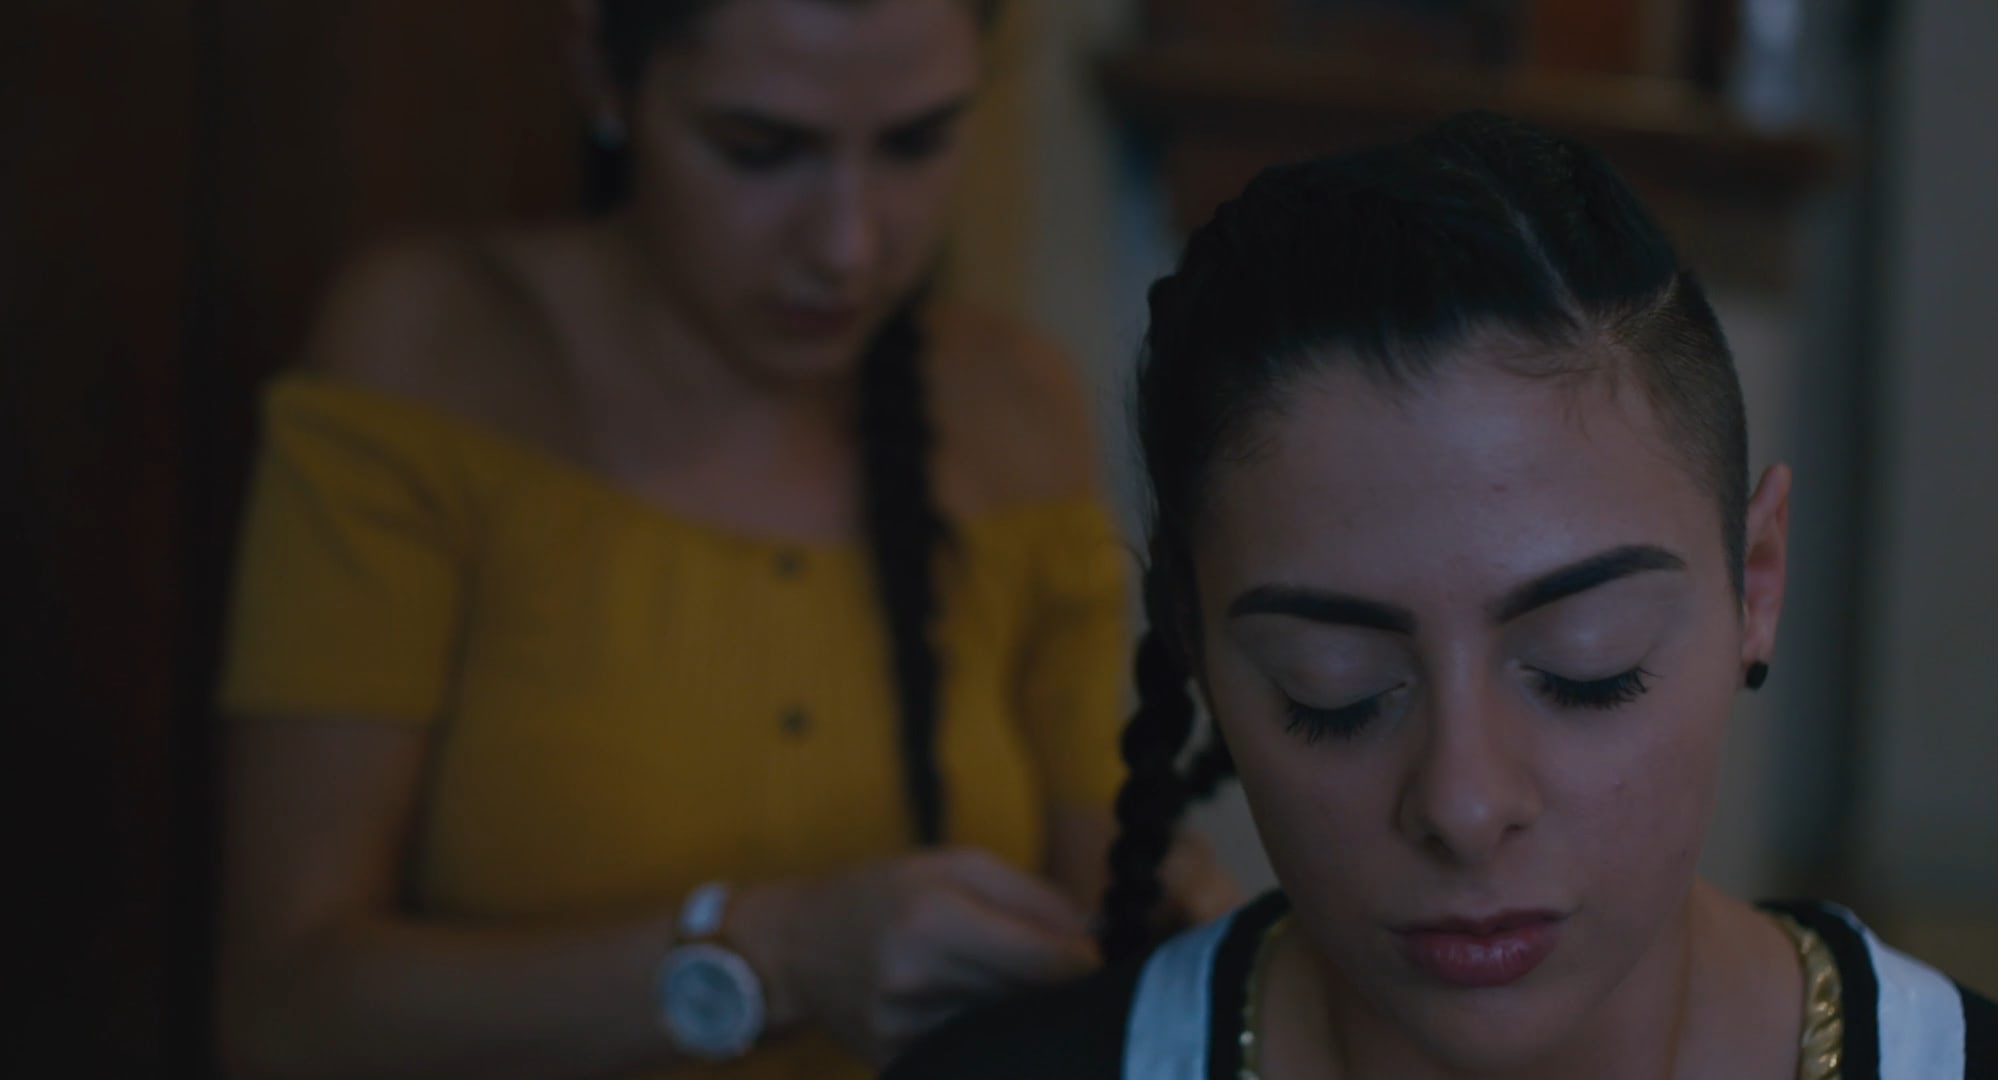 A young woman with her eyes closed has her hair braided by another woman behind her.